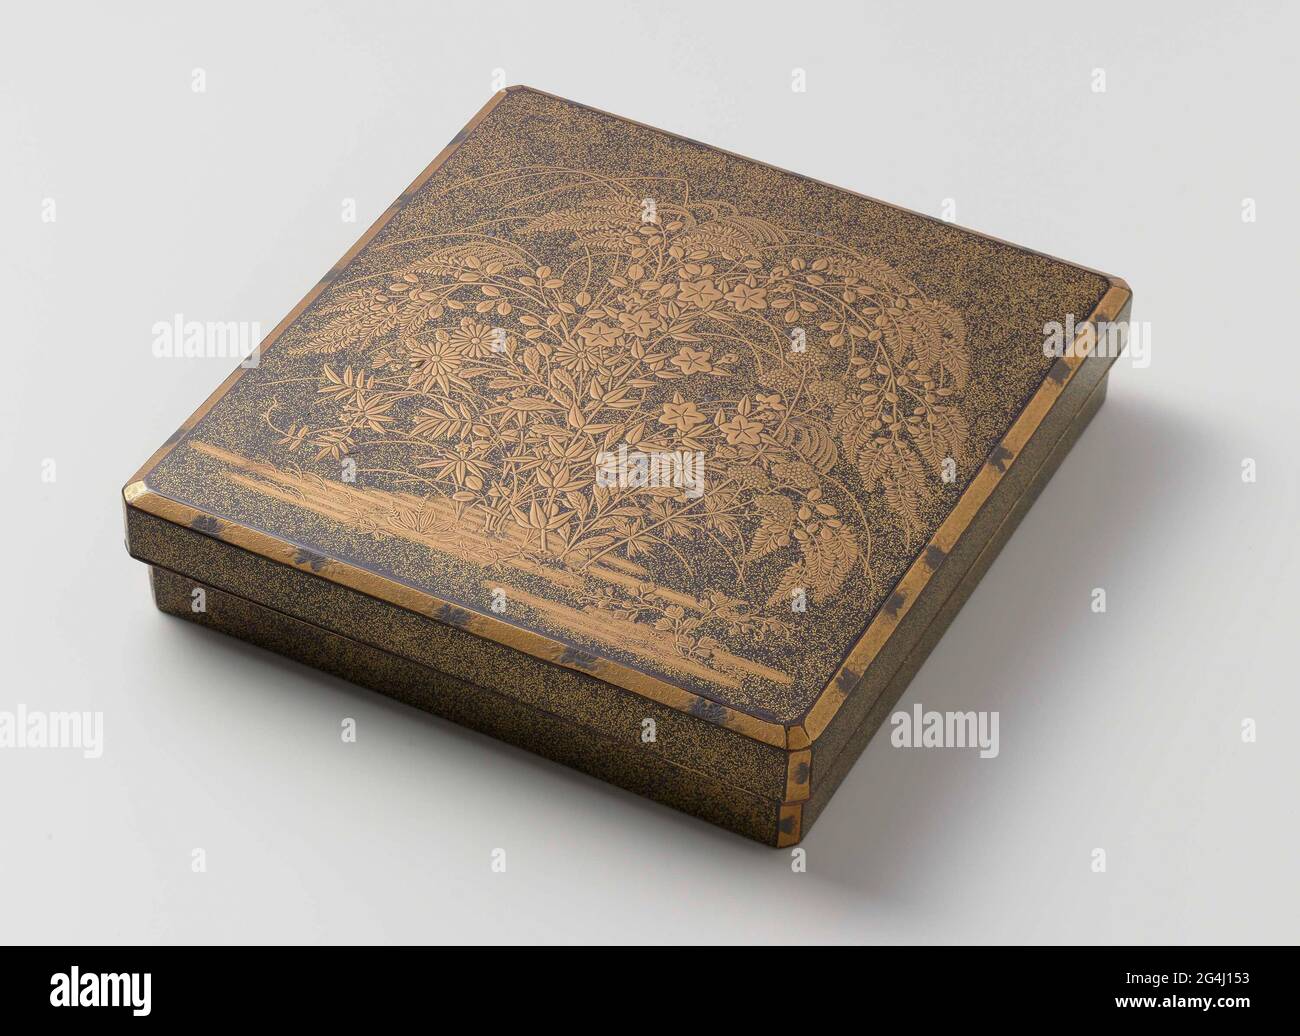 . A bouquet of flowering autumn plants adorns the lid of this box for writing implements, in which a brush and inkstone would have been stored. Japanese lacquerware is decorated with autumnal motifs remarkably often. One explanation may be that autumn in Japan is a pleasant season, when the oppressive heat of summer is replaced by fine, clear weather. Stock Photo